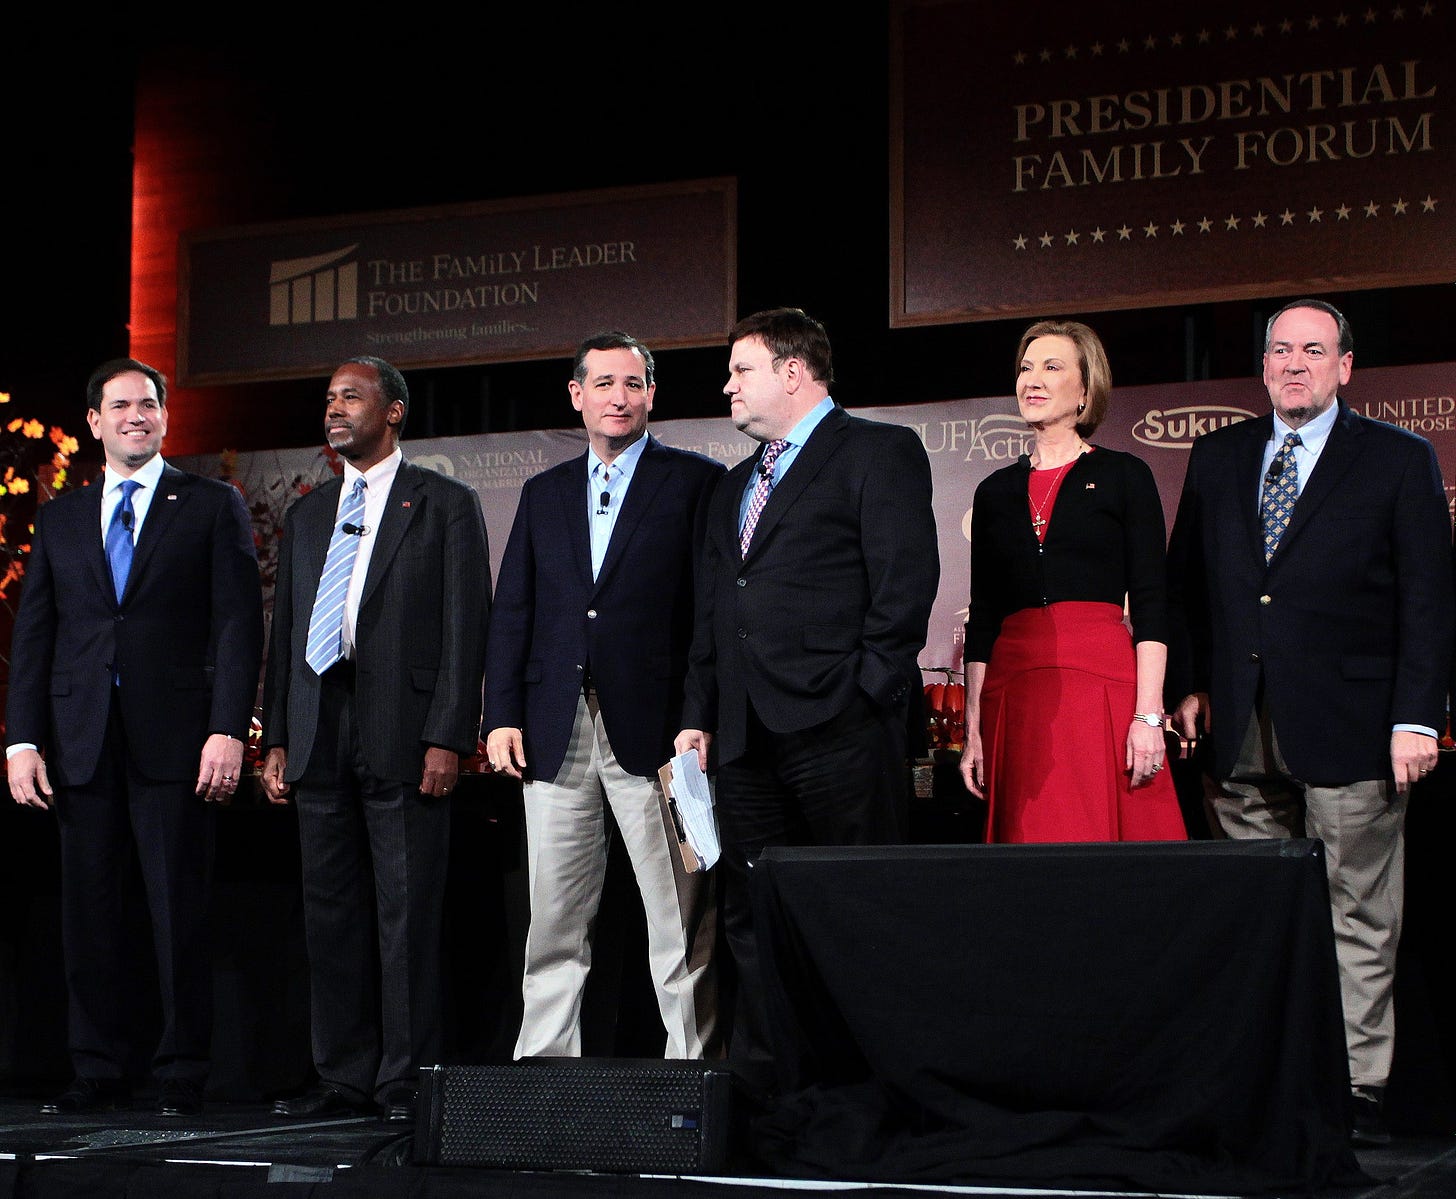 Republican Party presidential candidates Marco Rubio, Ben Carson, Ted Cruz, the host, Frank Luntz, Carly Fiorina, and Mike Huckabee join the Presidential Family Forum in Des Moines, Iowa in 2015. Credit: Gage Skidmore